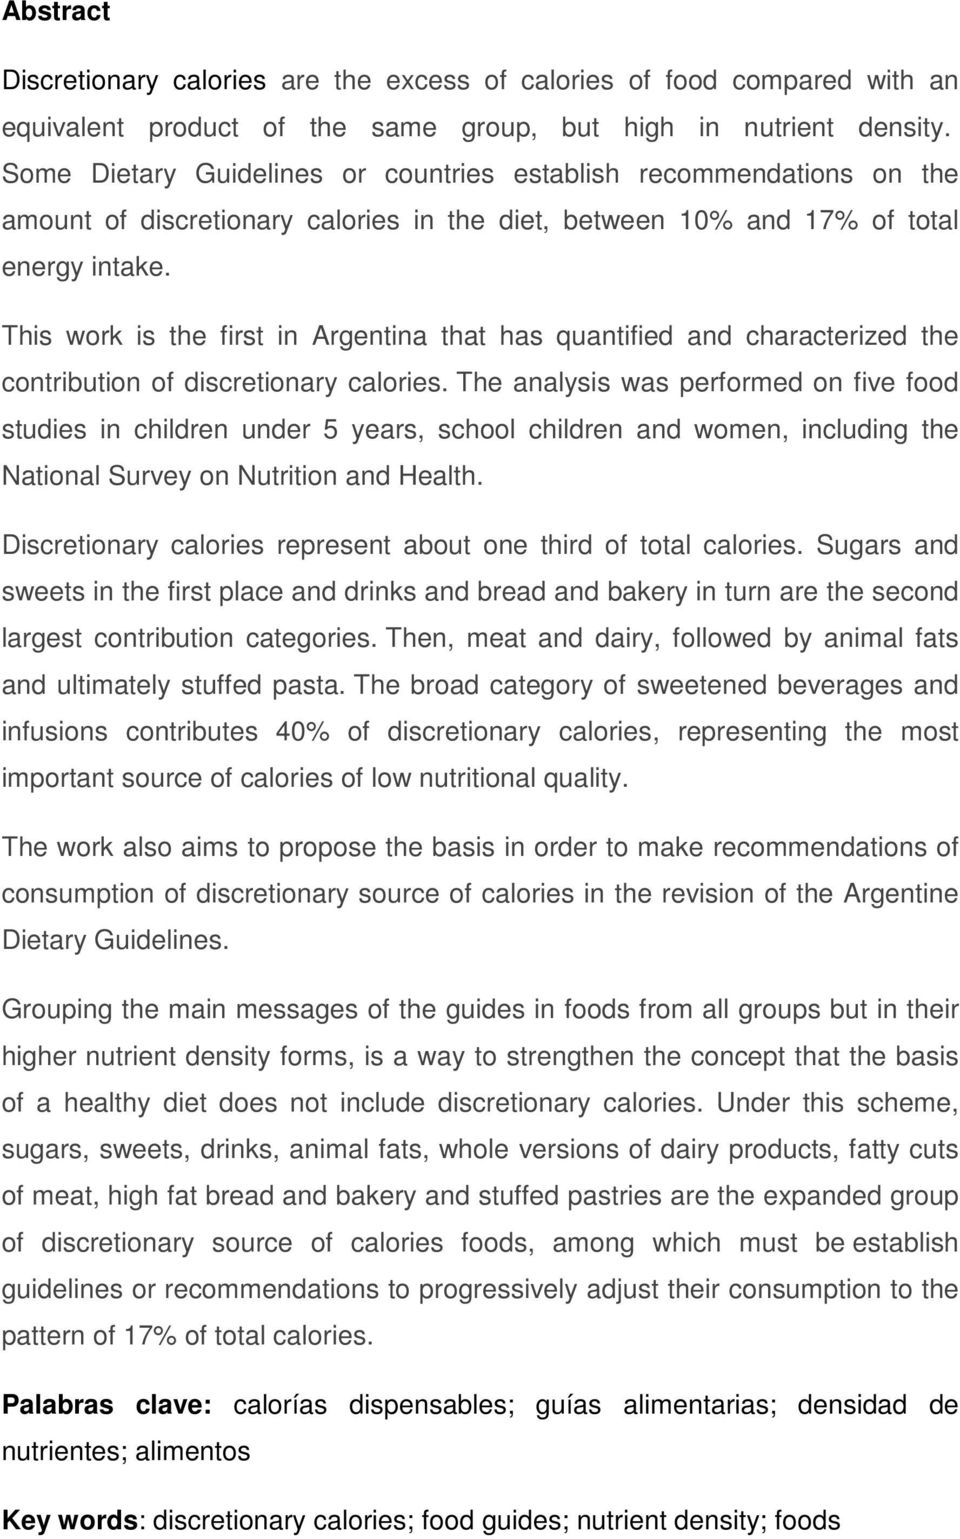 This work is the first in Argentina that has quantified and characterized the contribution of discretionary calories.